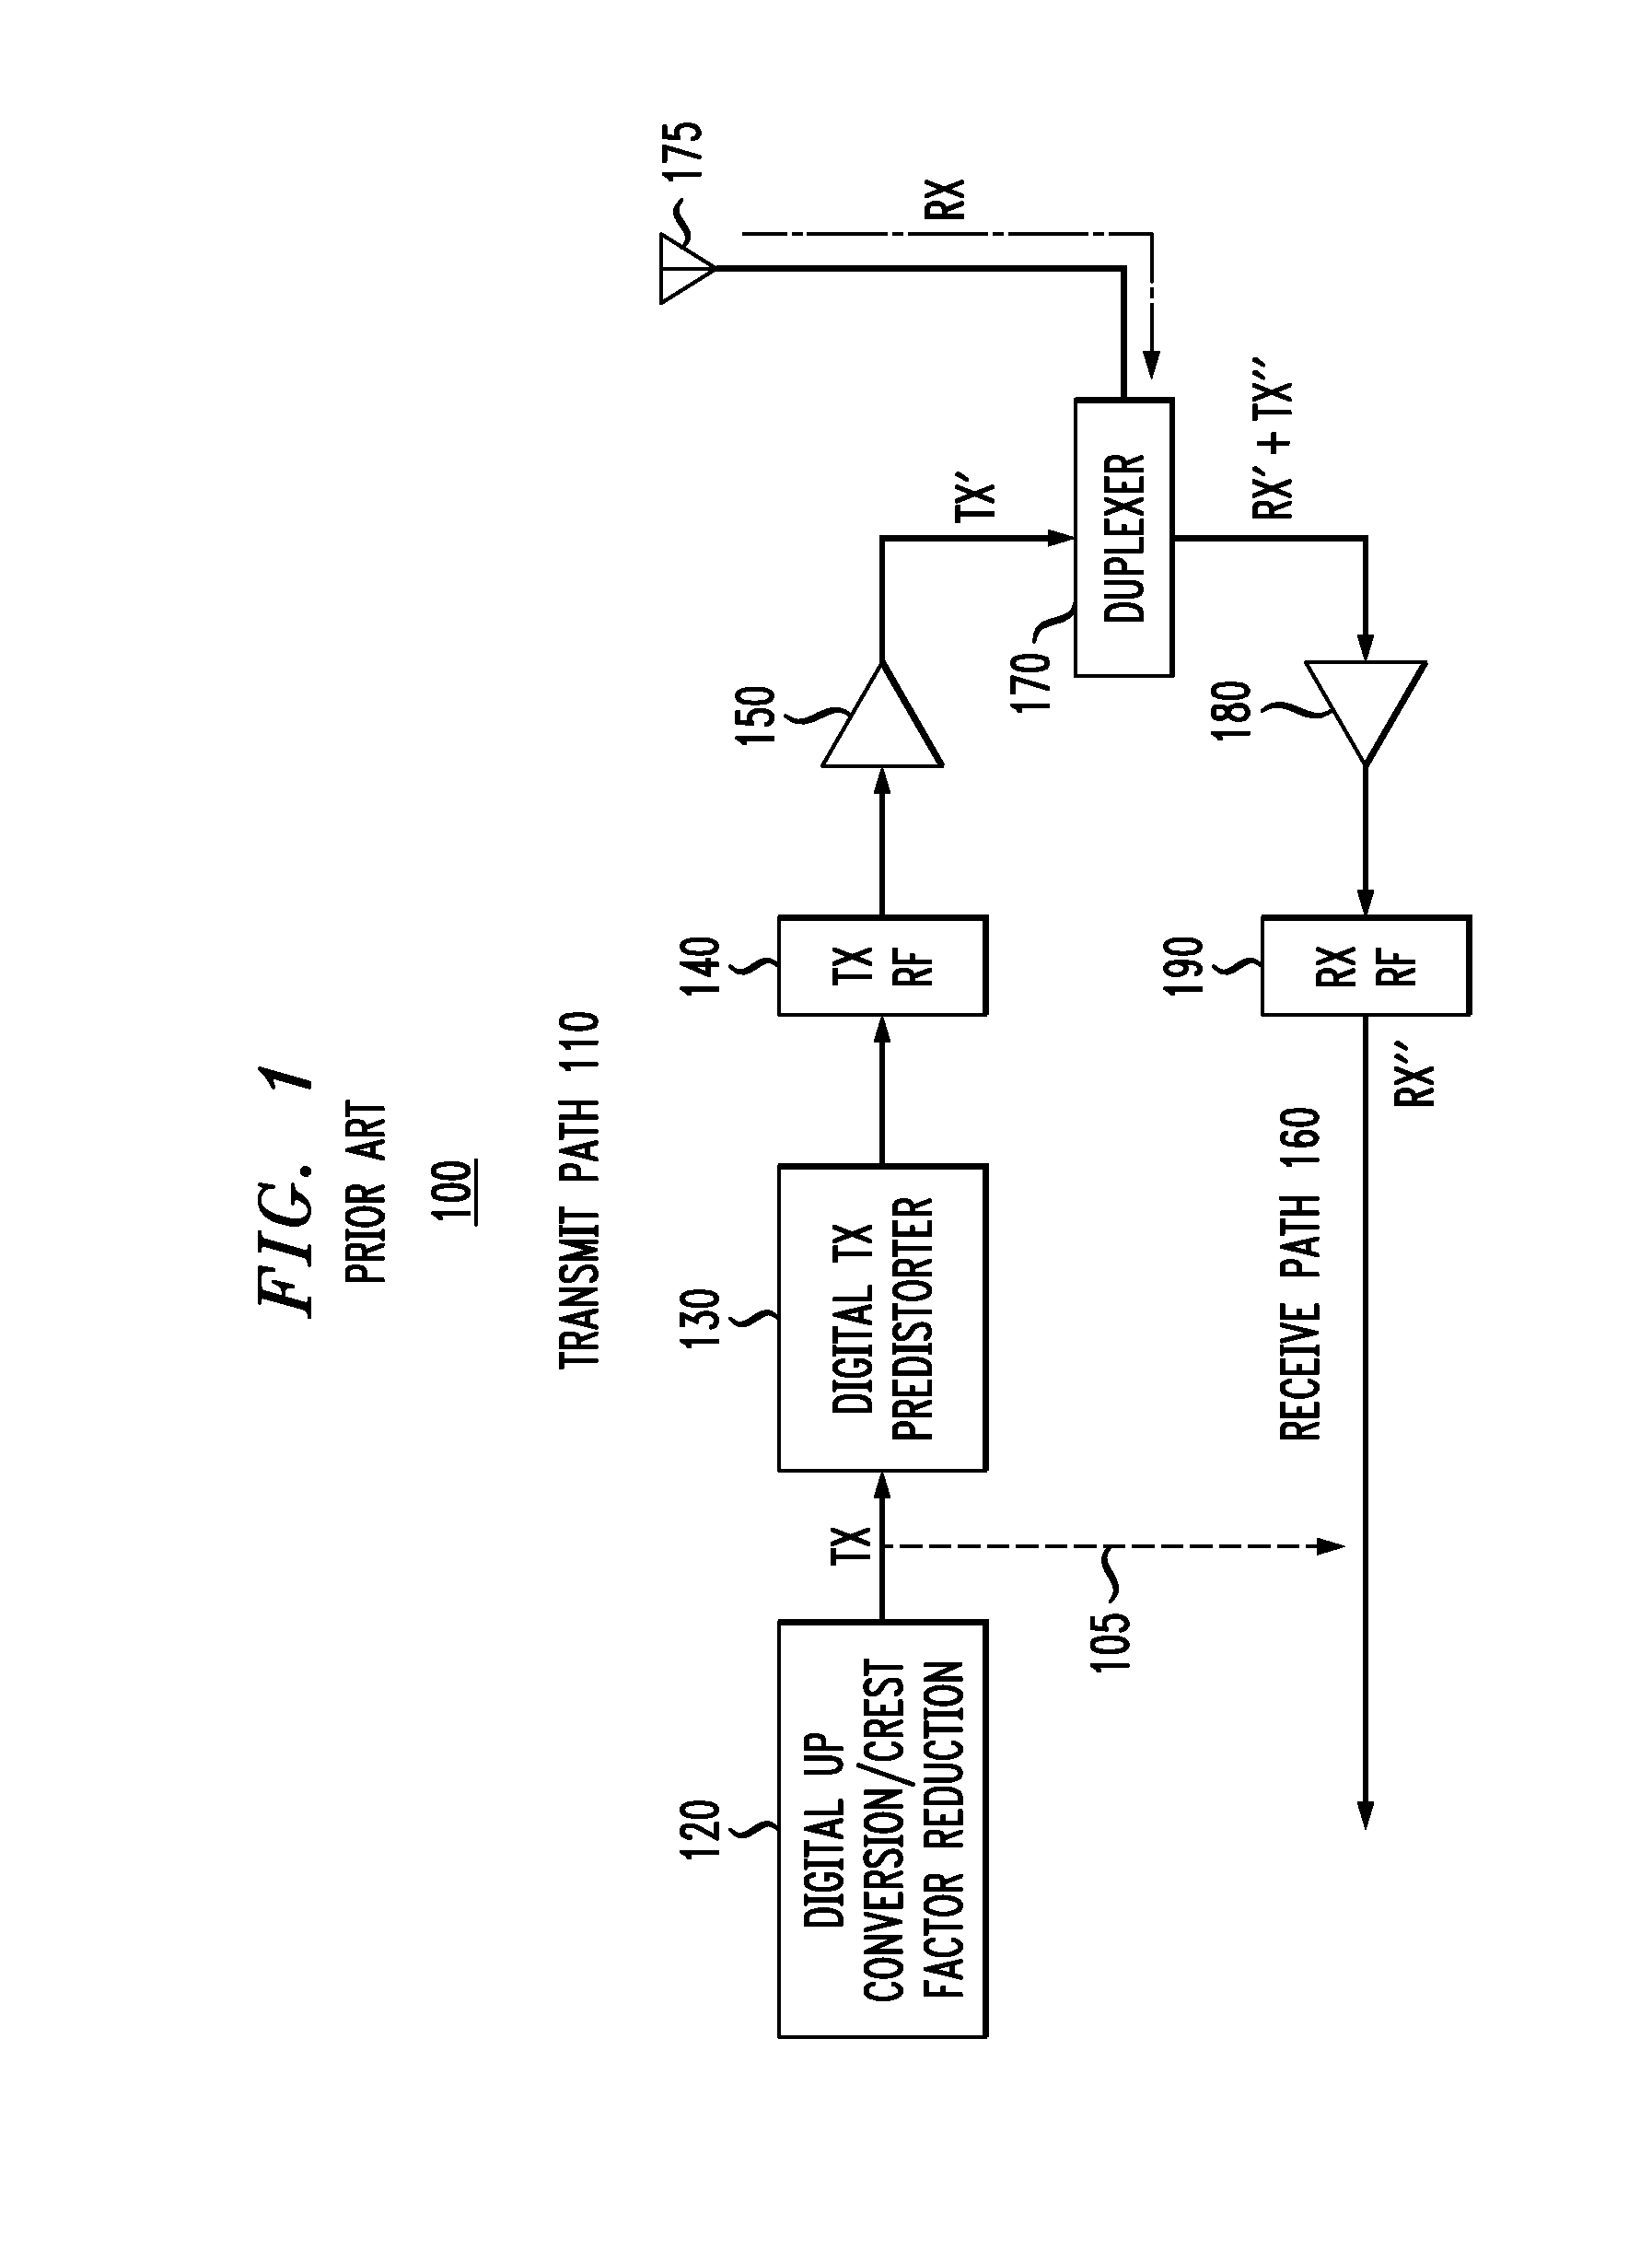 Non-Linear Interference Cancellation For Wireless Transceivers